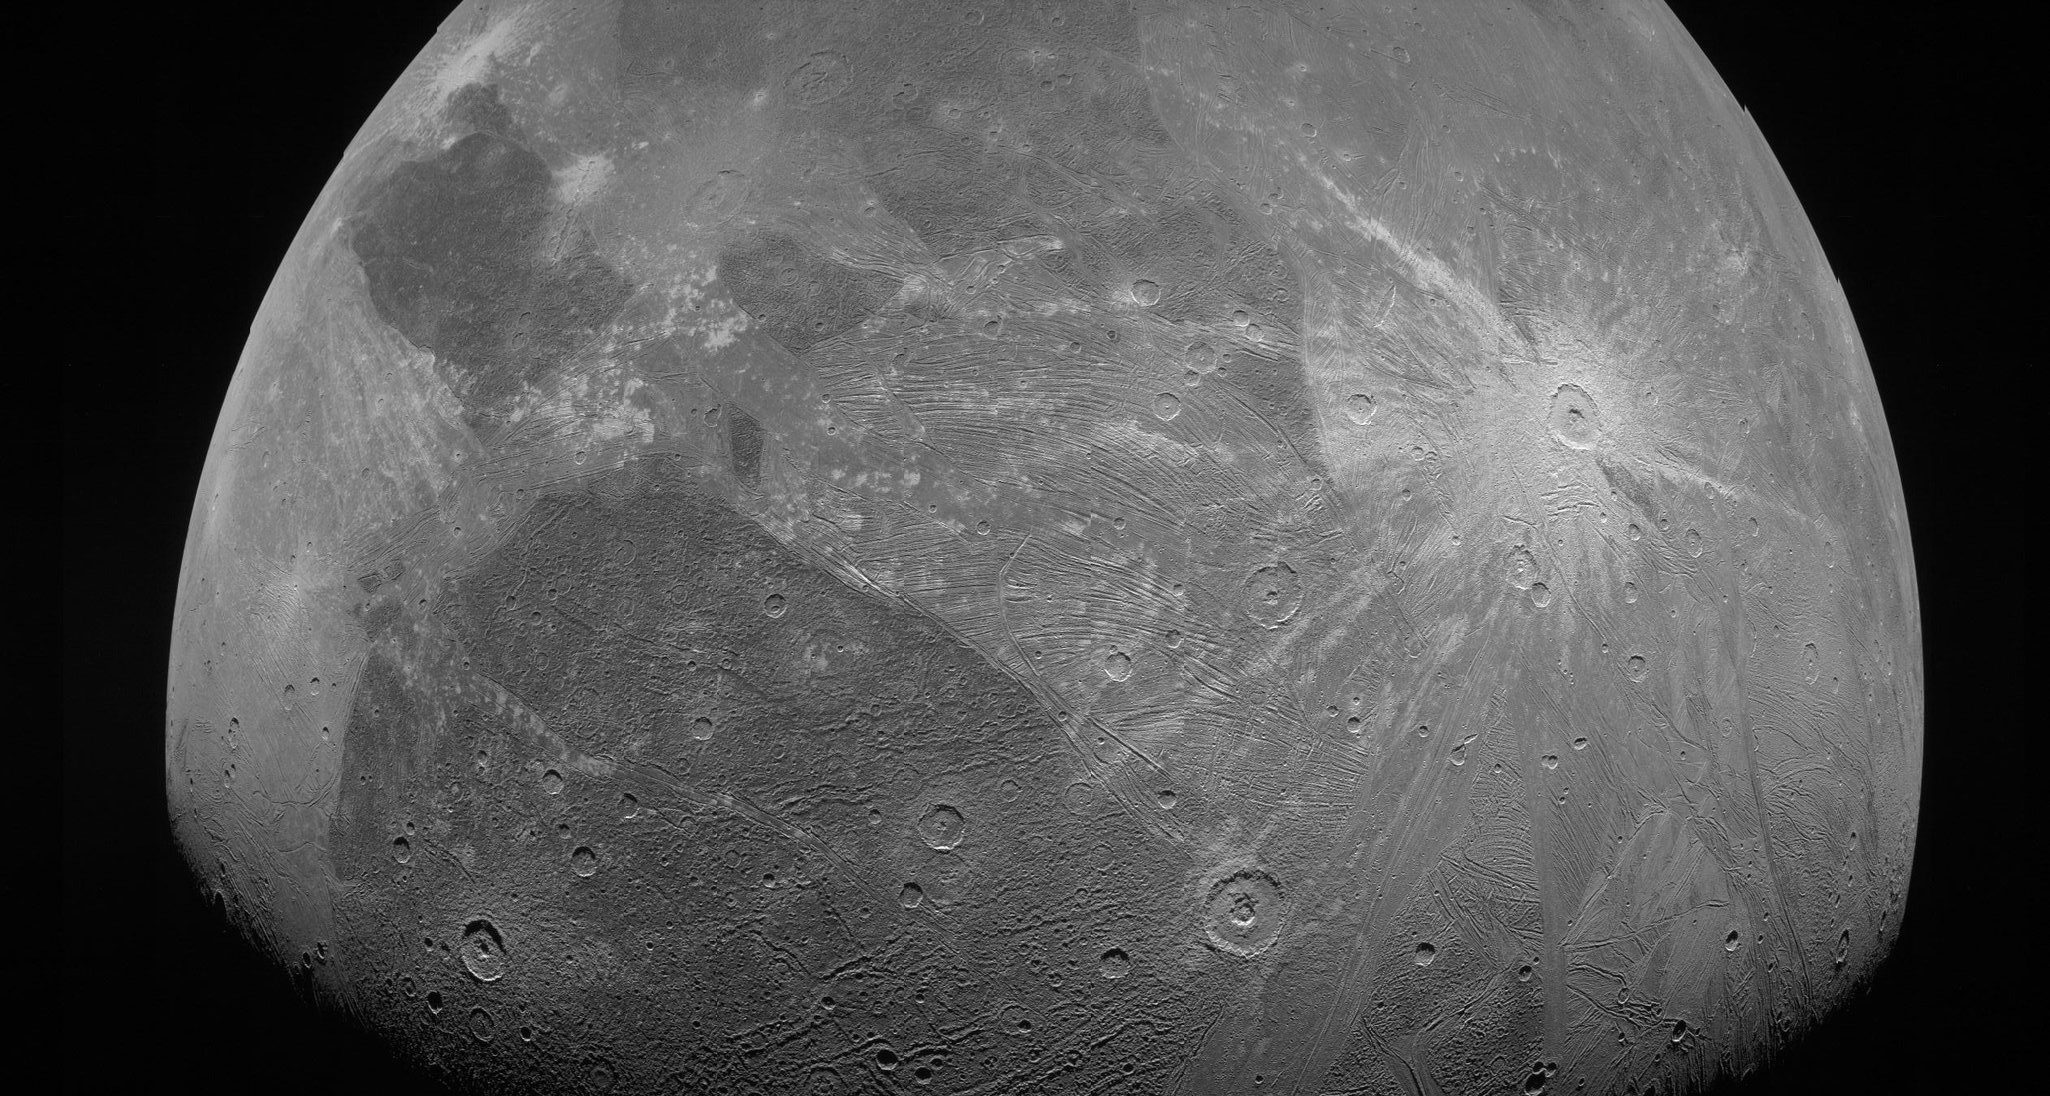 NASA released an audio recording containing the sounds of Ganymede. Credit: NASA/Juno